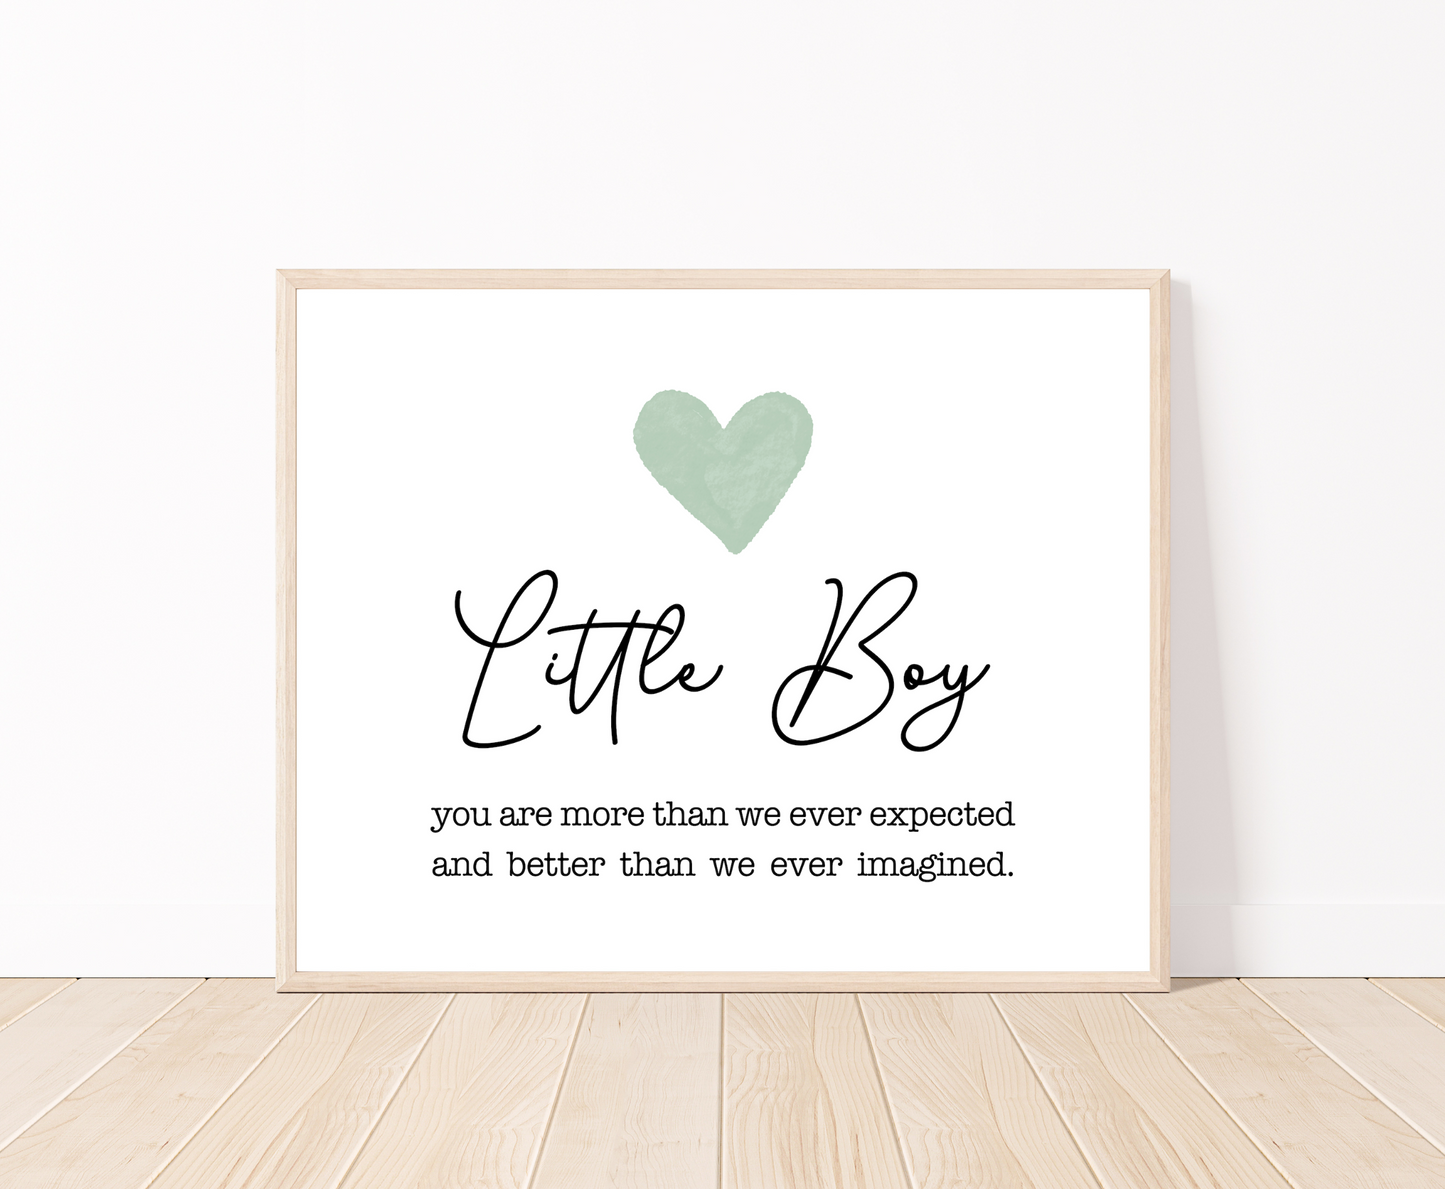 A graphic showing a baby green heart, with a piece of writing that says: “Little boy, you are more than we ever expected, and better than we ever imagined.”